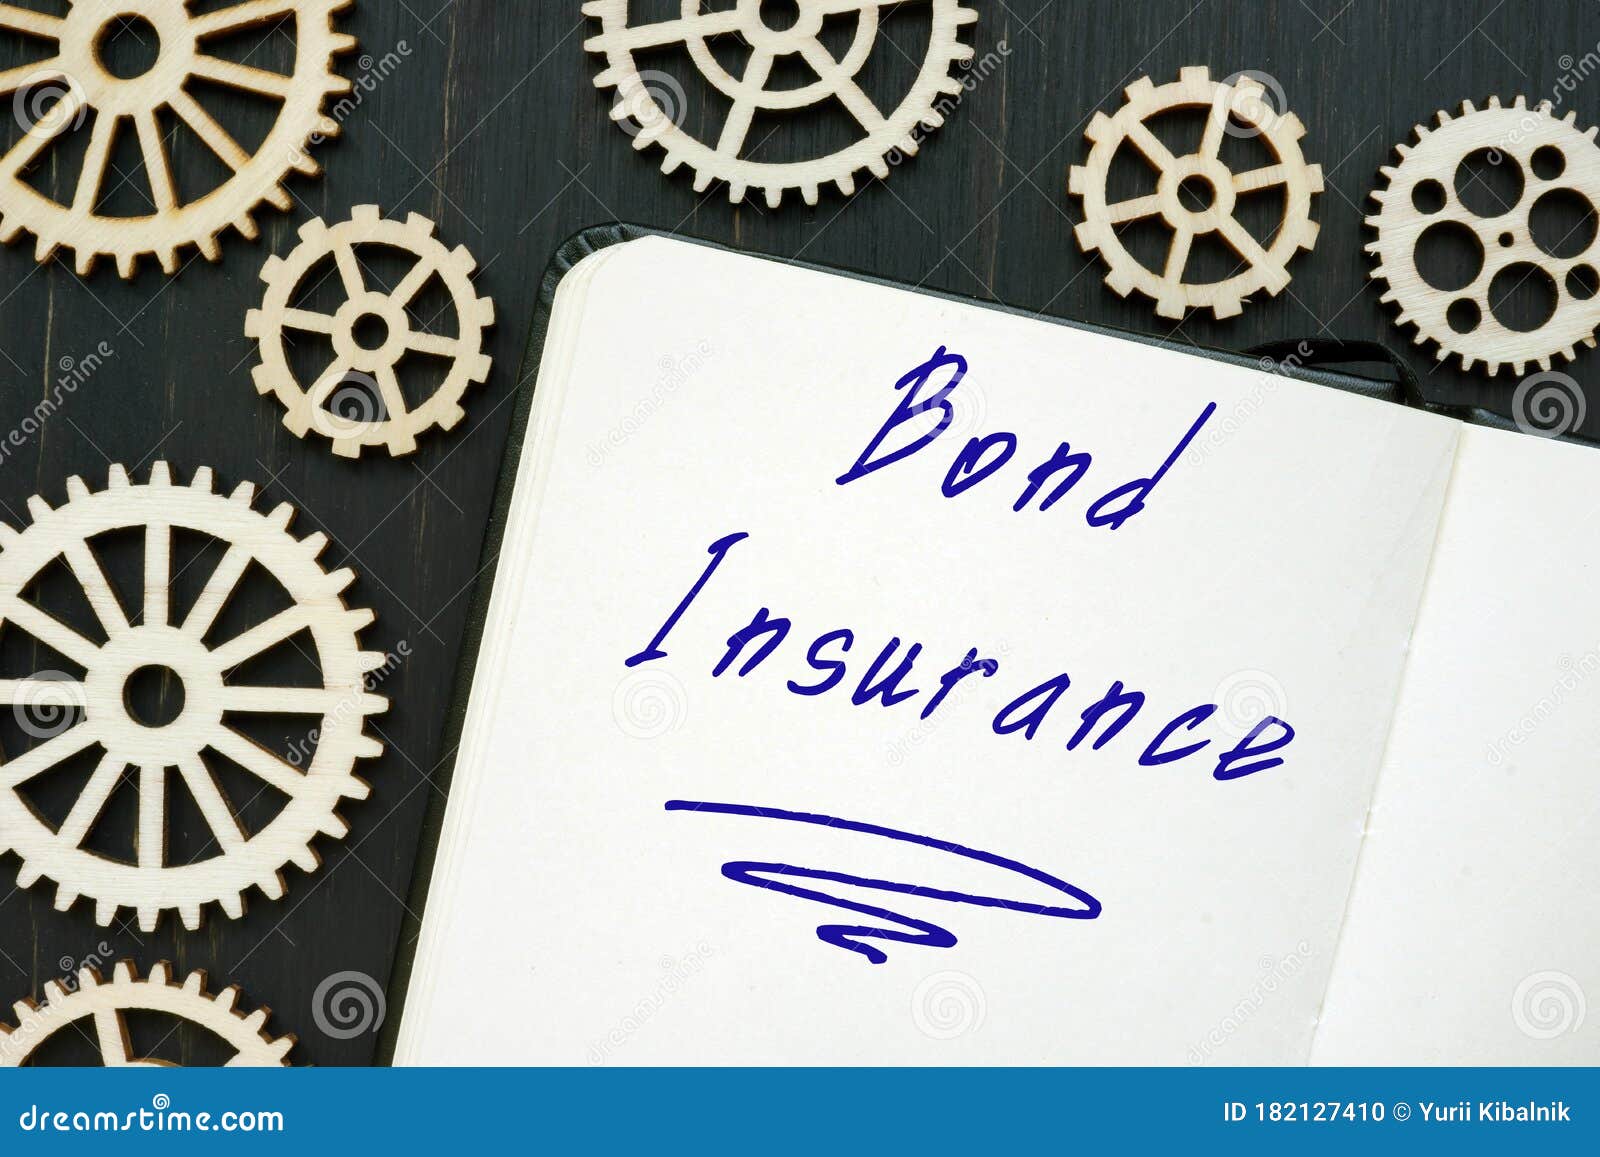 business concept meaning bond insurance with sign on the page